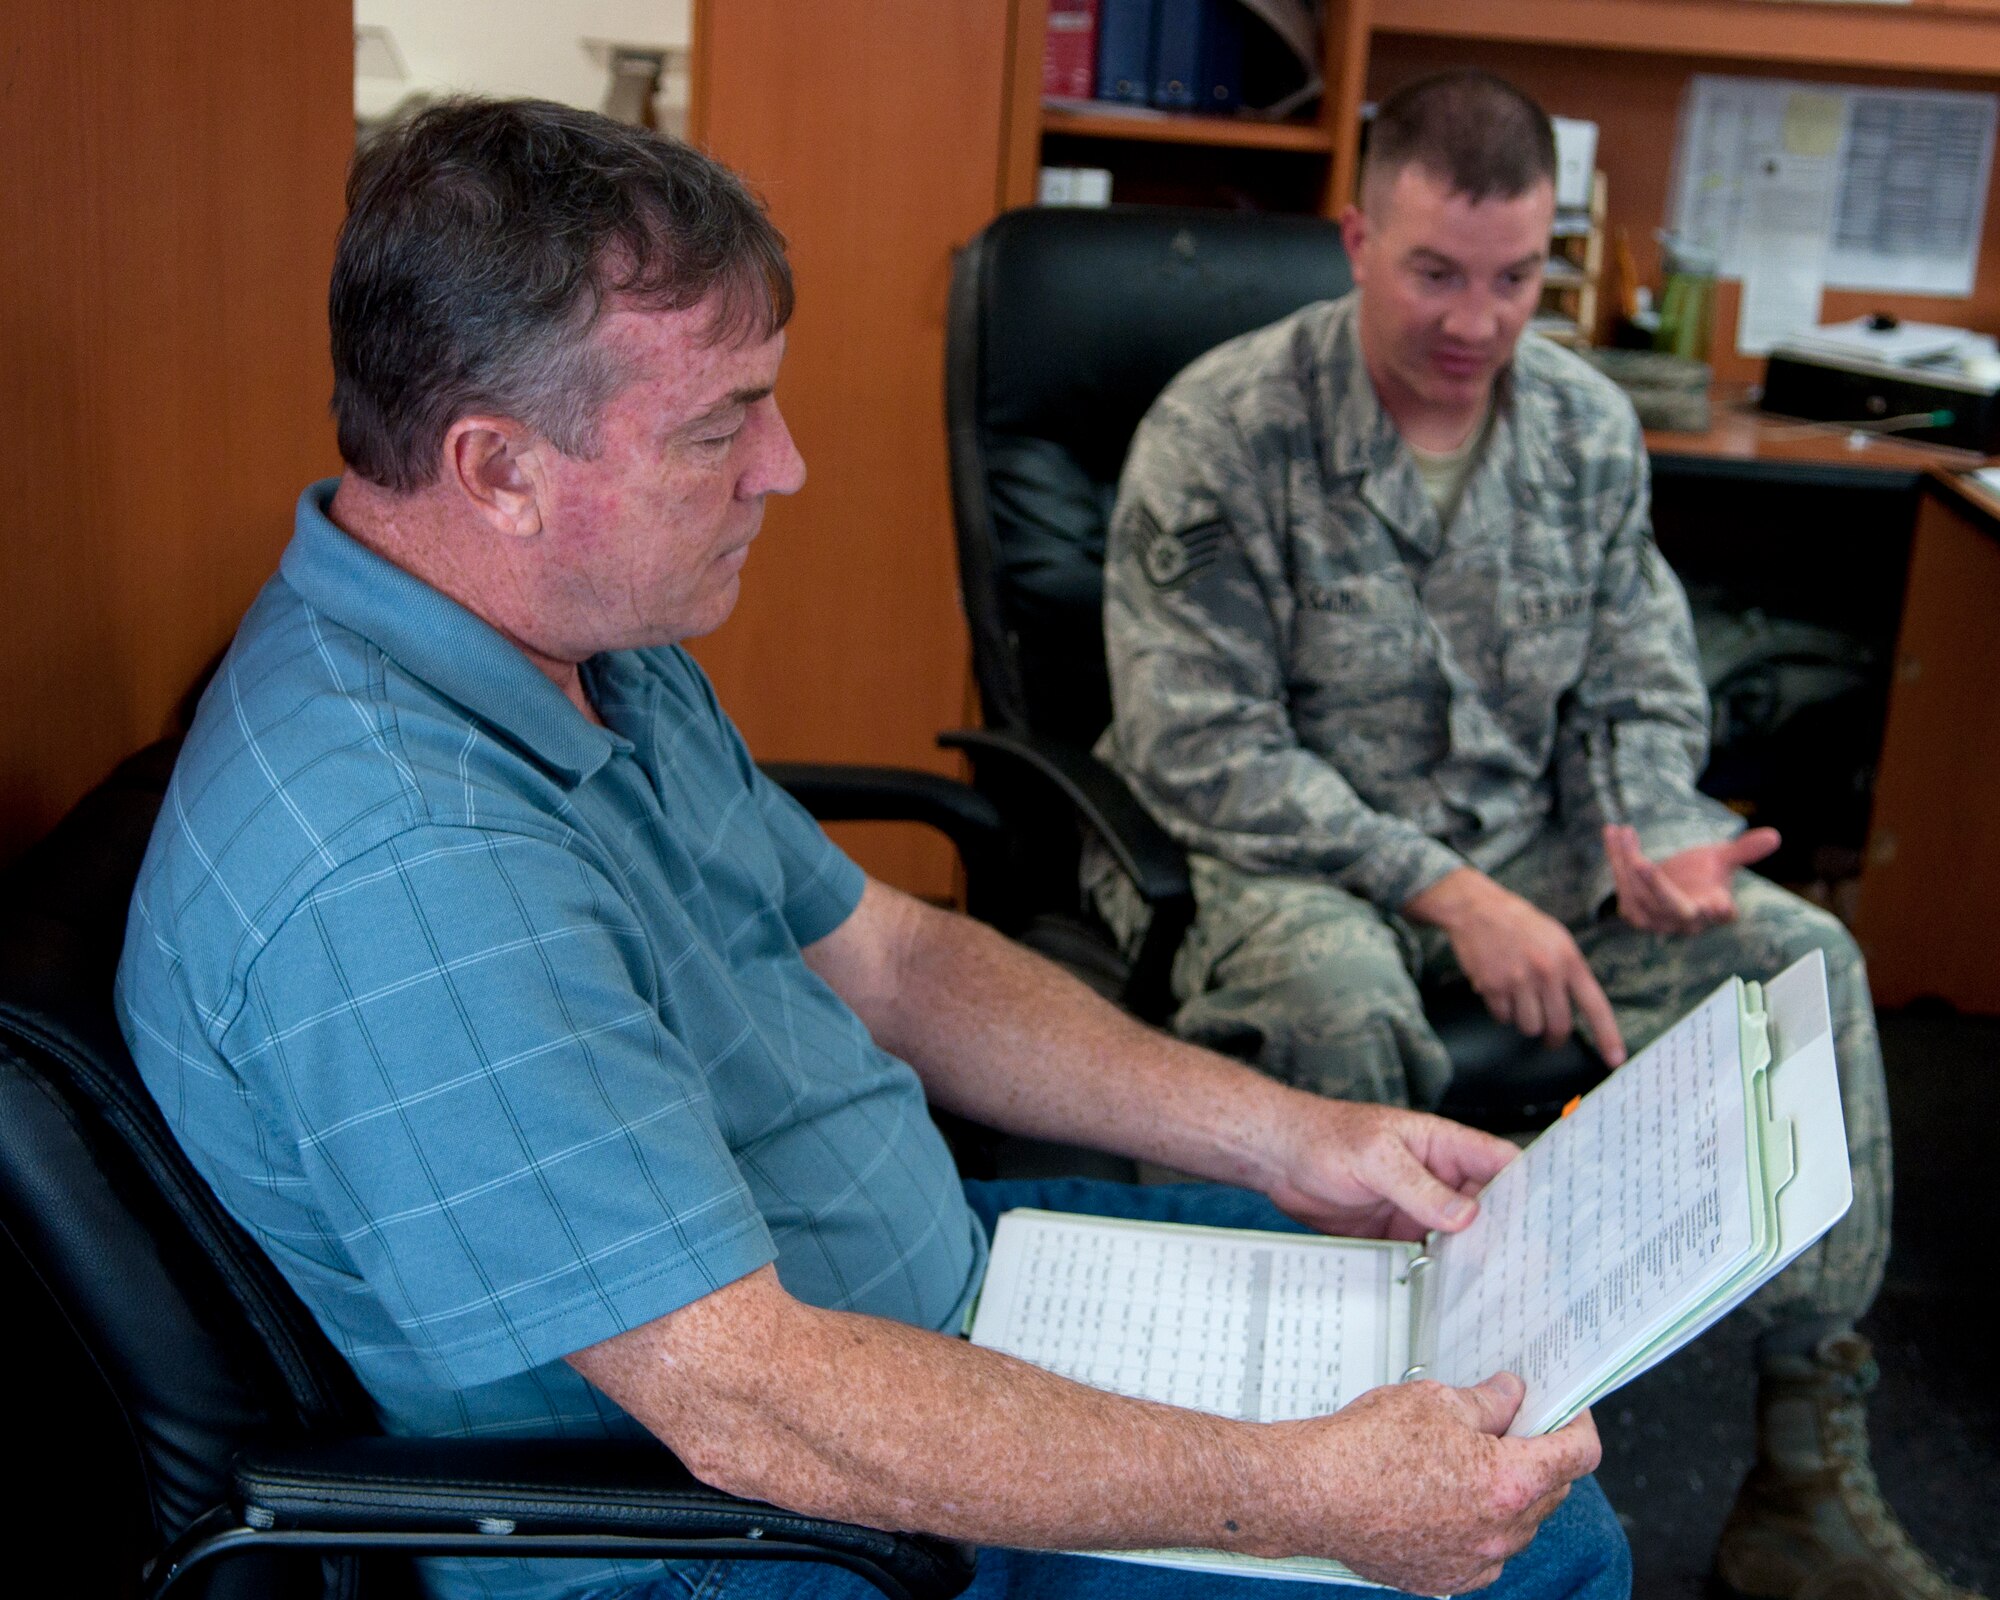 Richard Mullee, 90th MW Safety Office missile safety superintendent, reviews the 90th Missile Maintenance squadron checklists during the its annual weapons safety inspection June 9, 2015, on F.E. Warren Air Force Base, Wyo. The office reviews checklists and guidance from higher leadership to assist Airmen on the job with remaining safe in their work environment. (U.S. Air Force photo by Airman 1st Class Malcolm Mayfield)